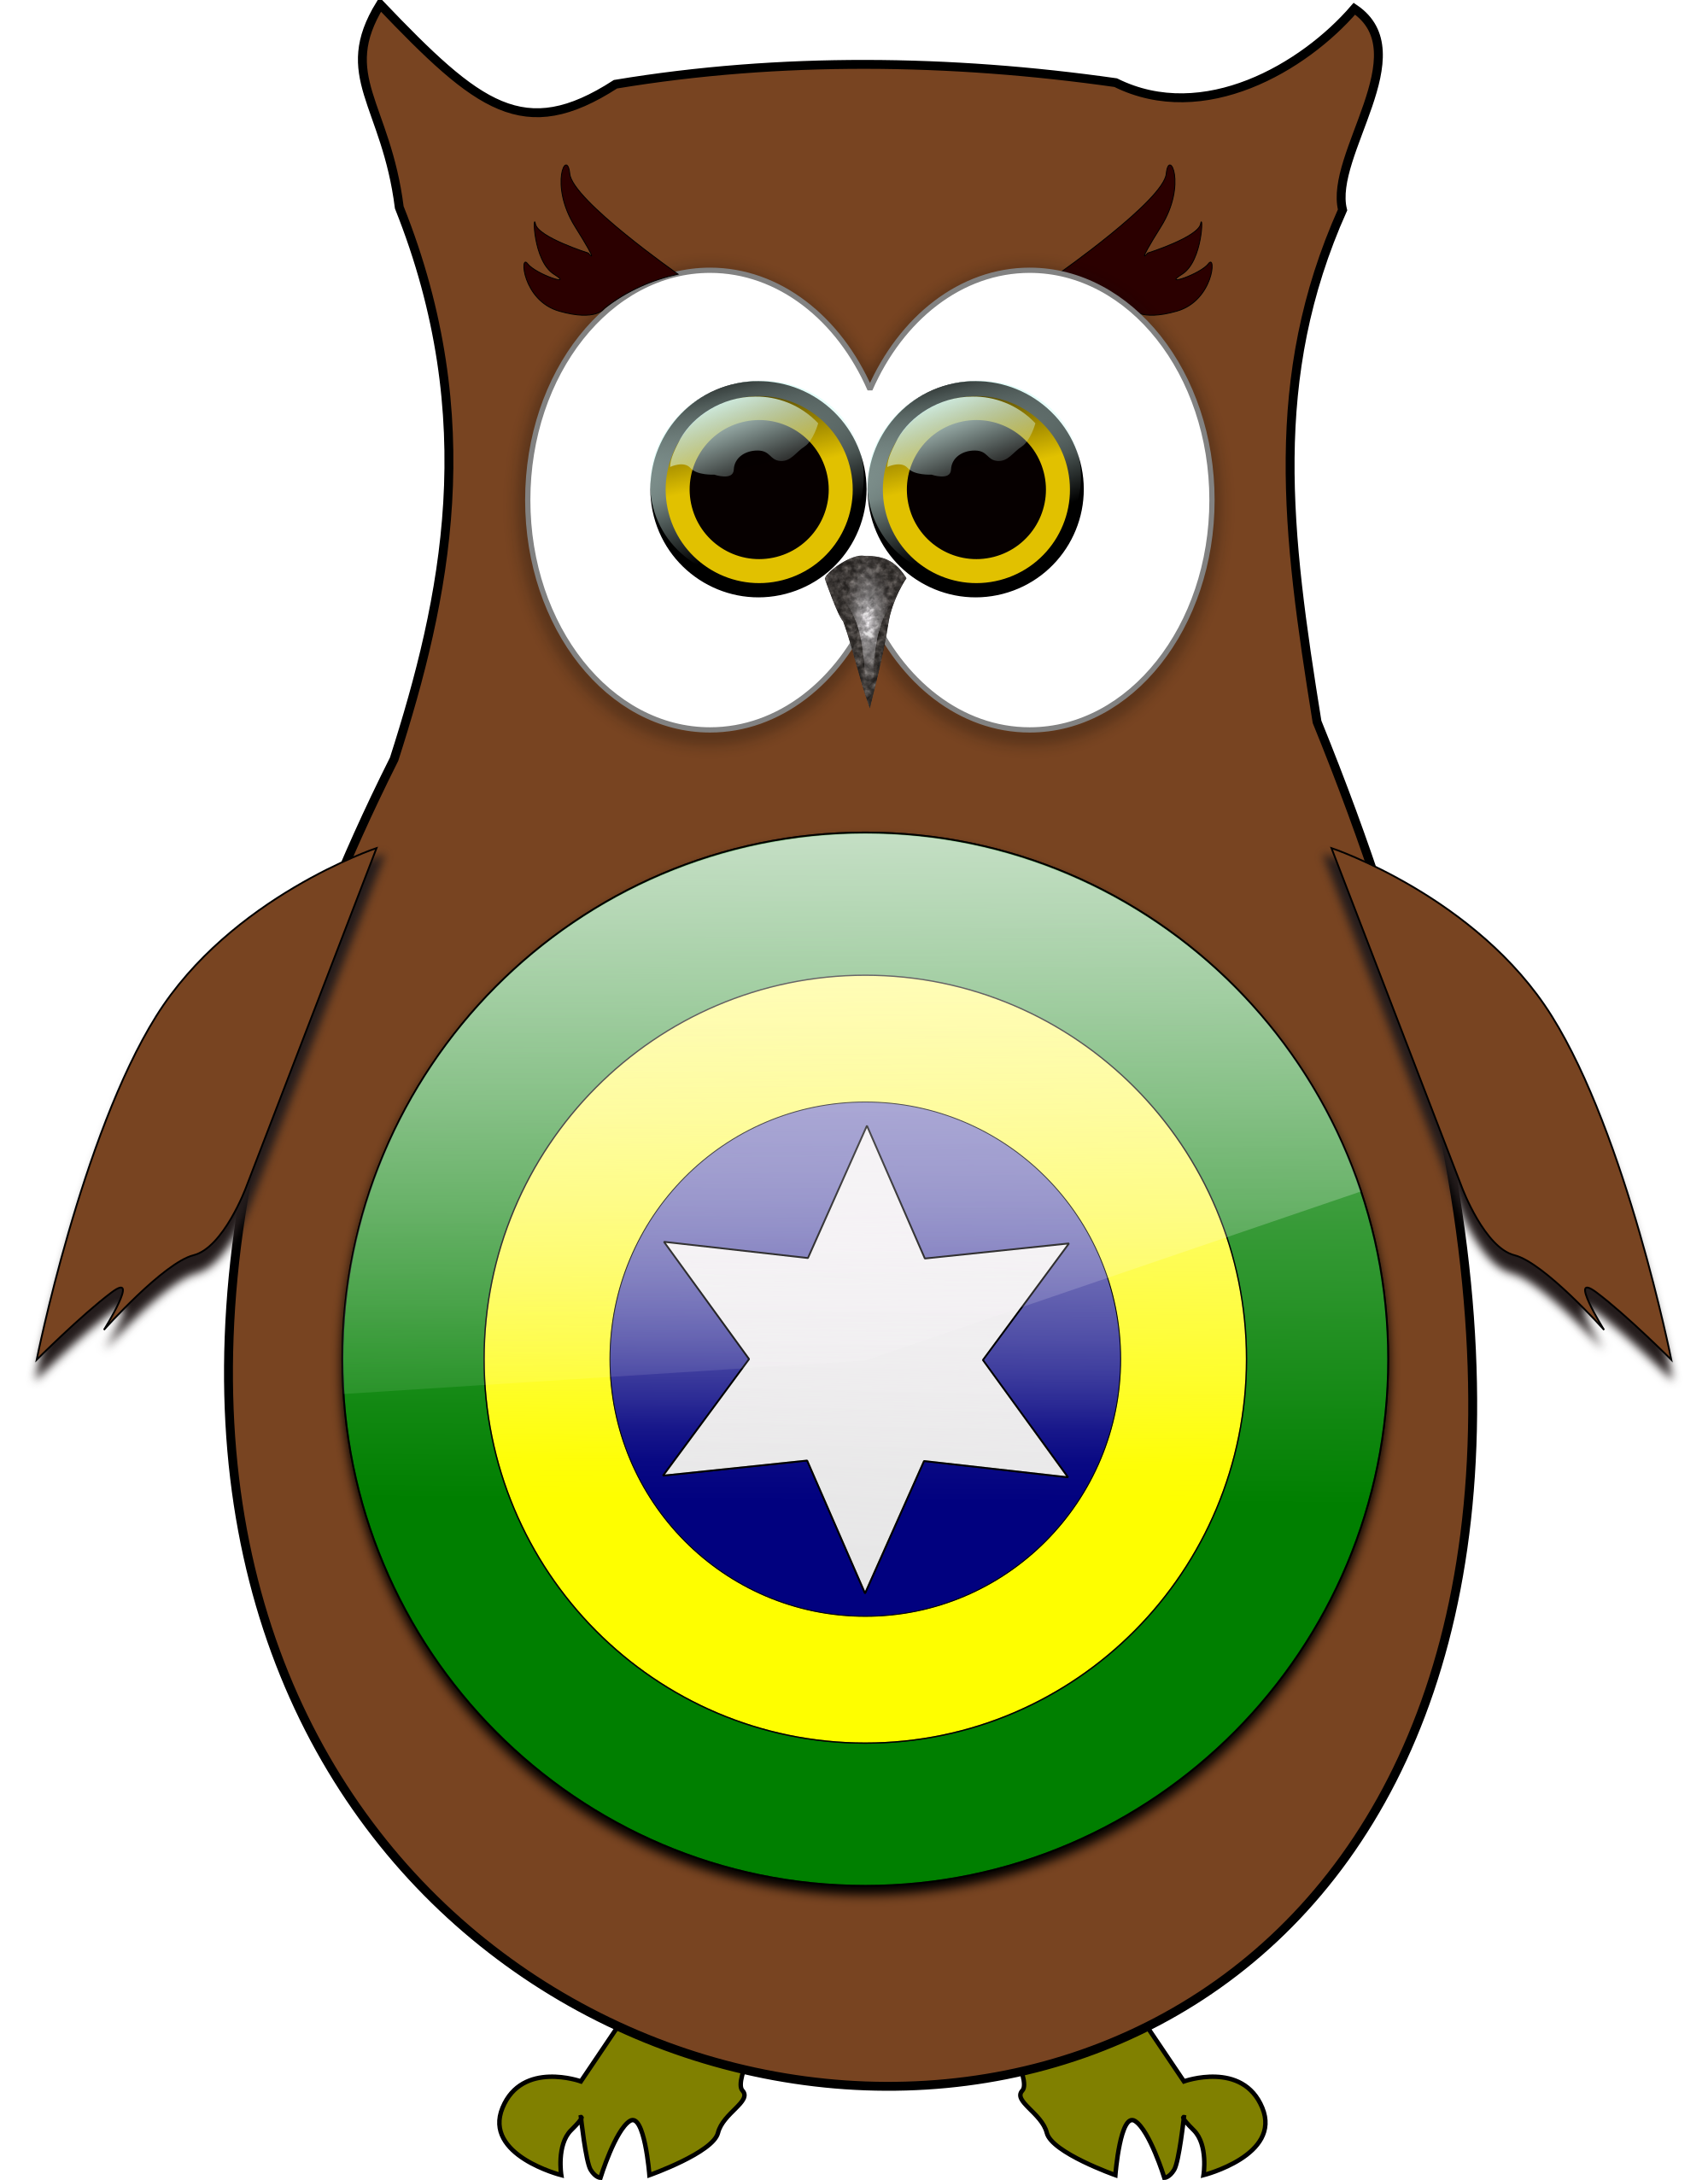 Free Owl Brazil Superhero And Vector Image Clipart